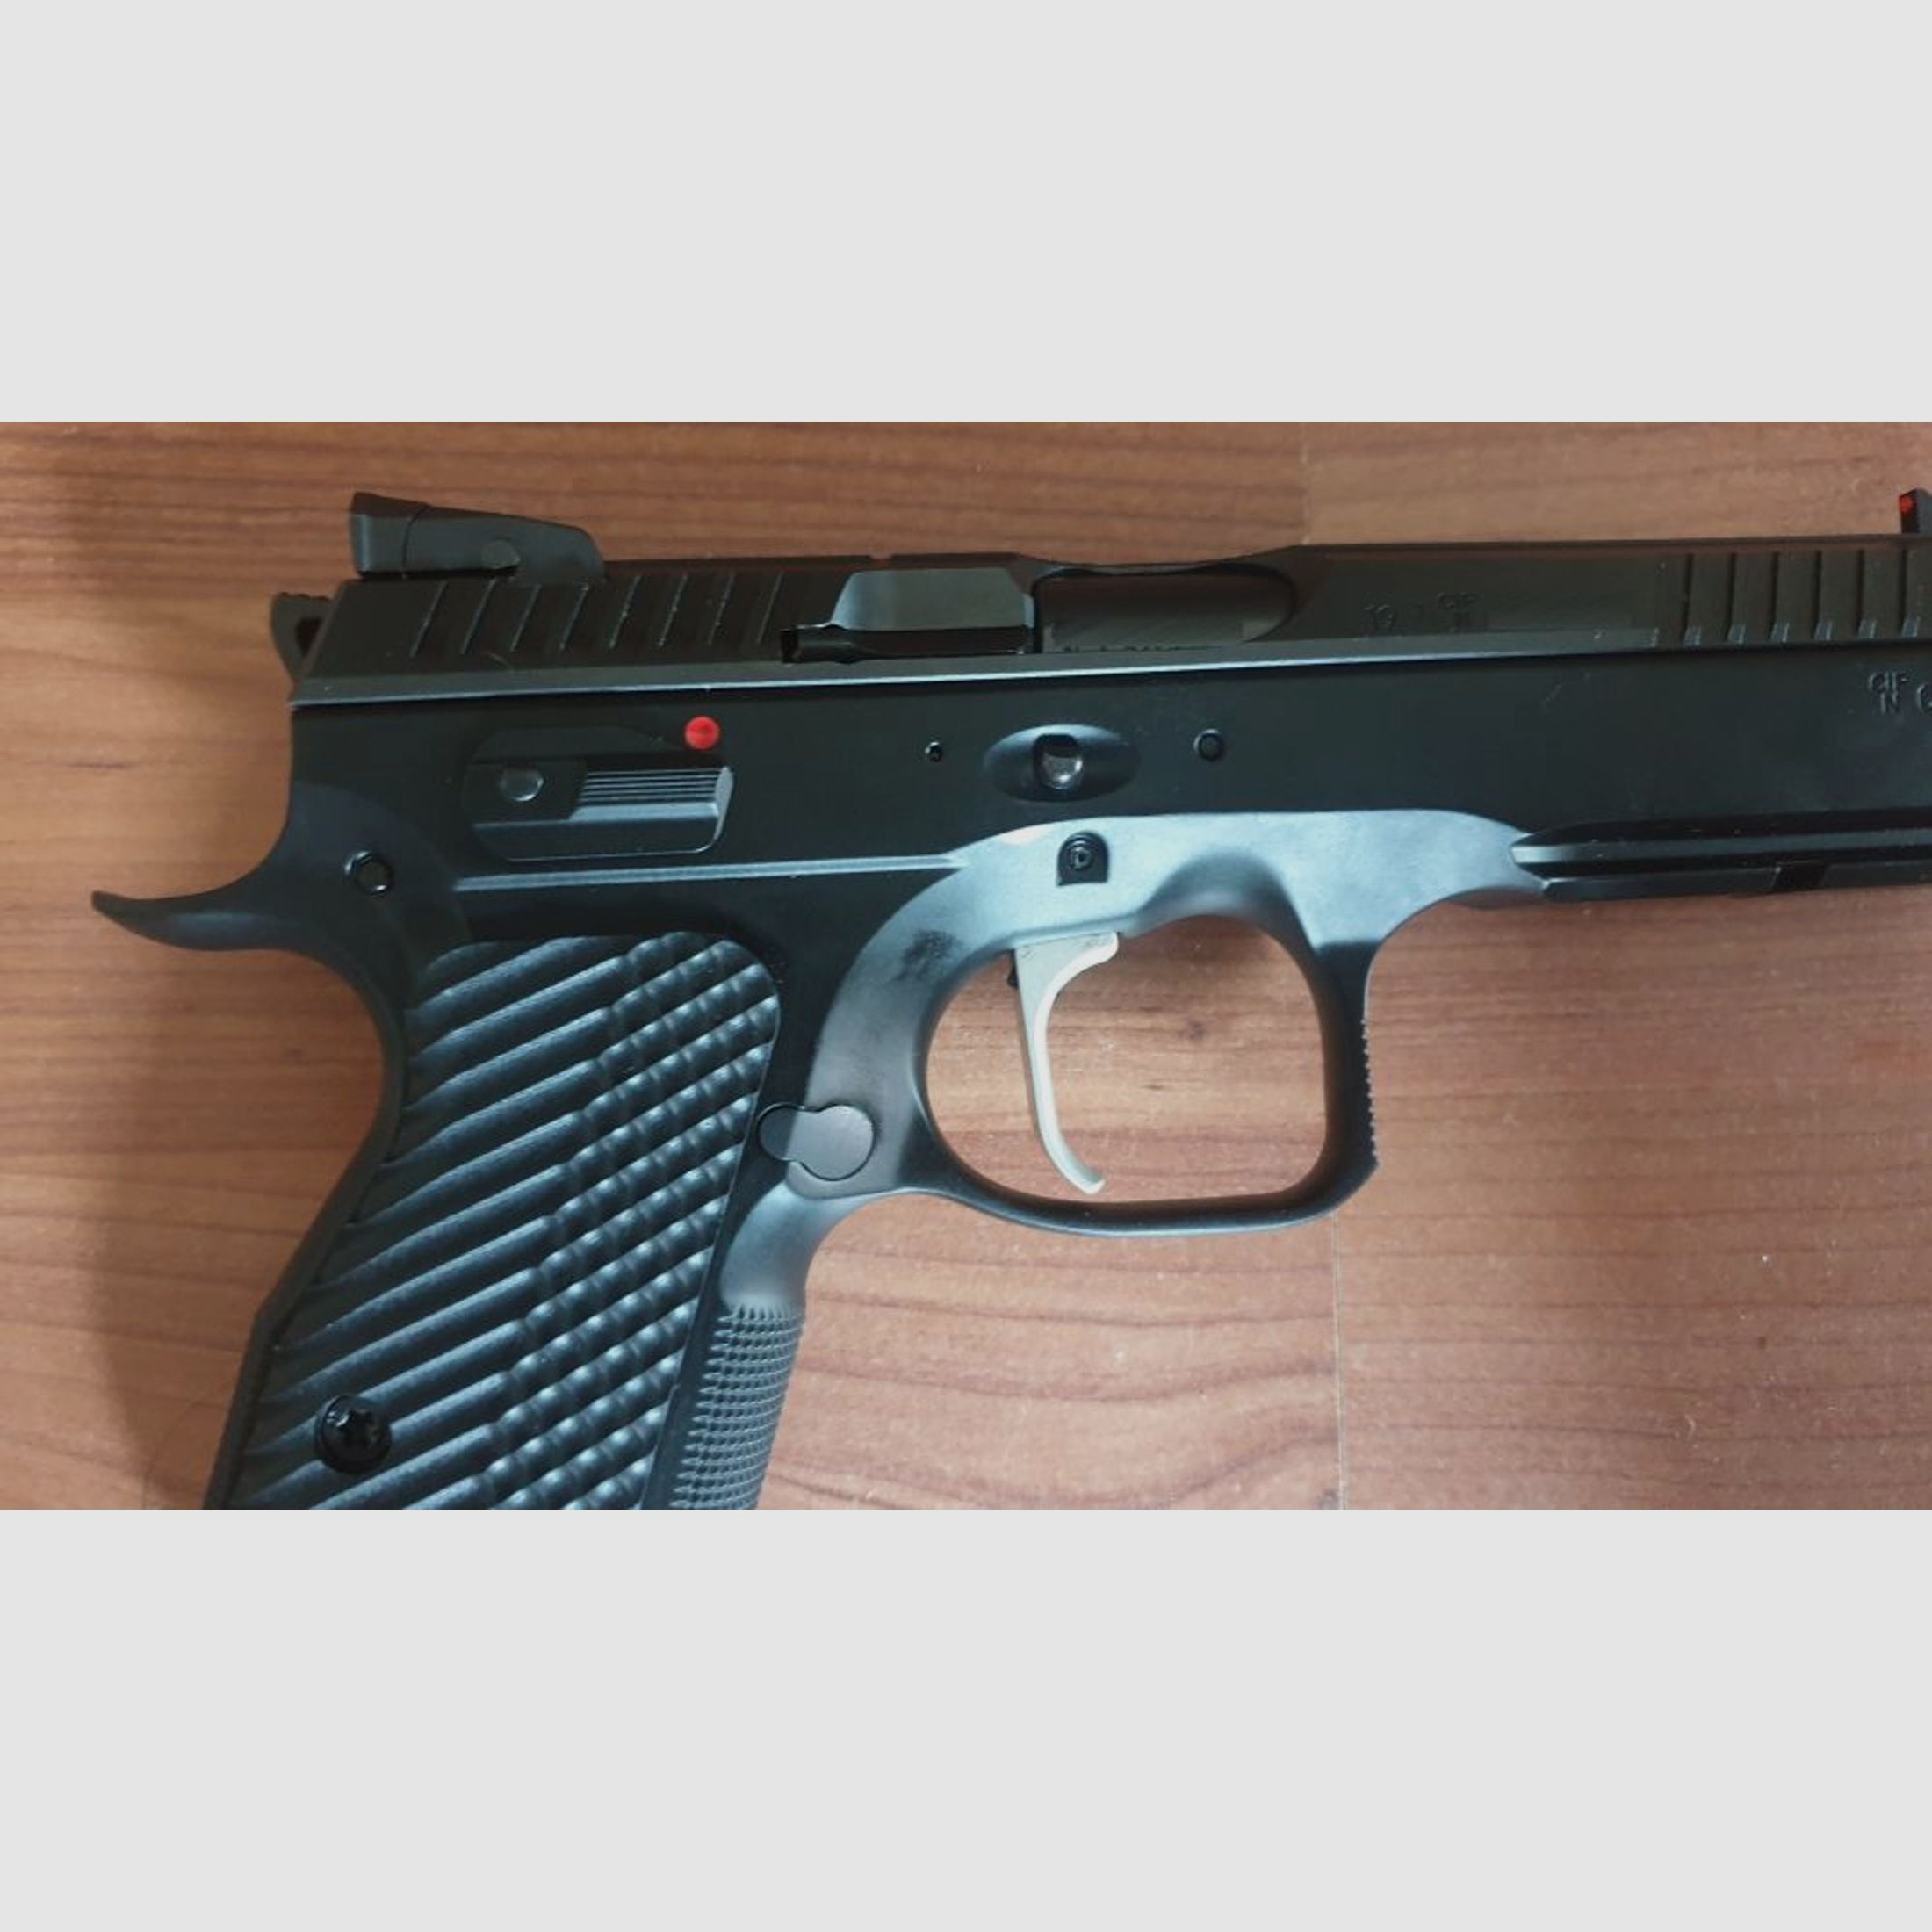 -CZ-	 Shadow 2 single action only 1291g